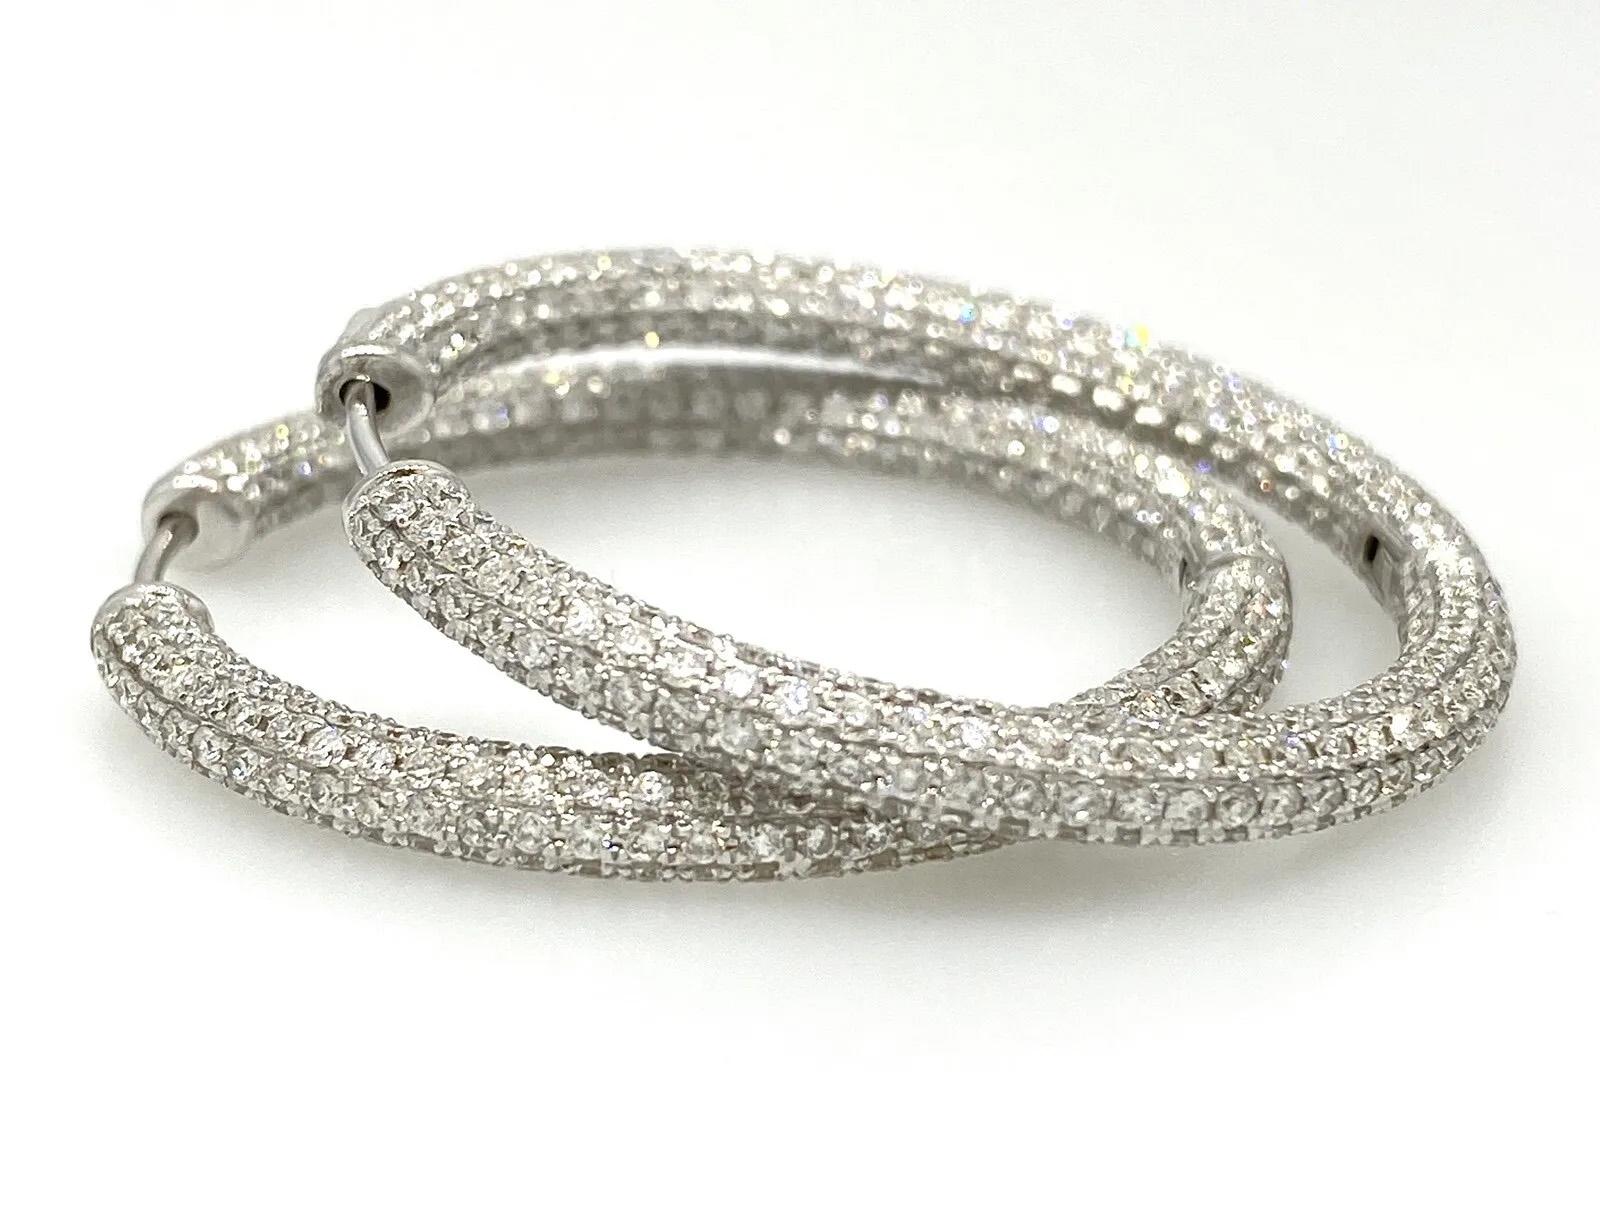 Round Pavé Diamond Hoop Earrings 5.04 Carats Total Weight in 18k White Gold

Diamond Hoop Earrings feature Round shaped Hoop earrings completely encrusted with 5.04 Carats of Round full cut Diamonds Pavé set in 18k White Gold.

Earrings measure